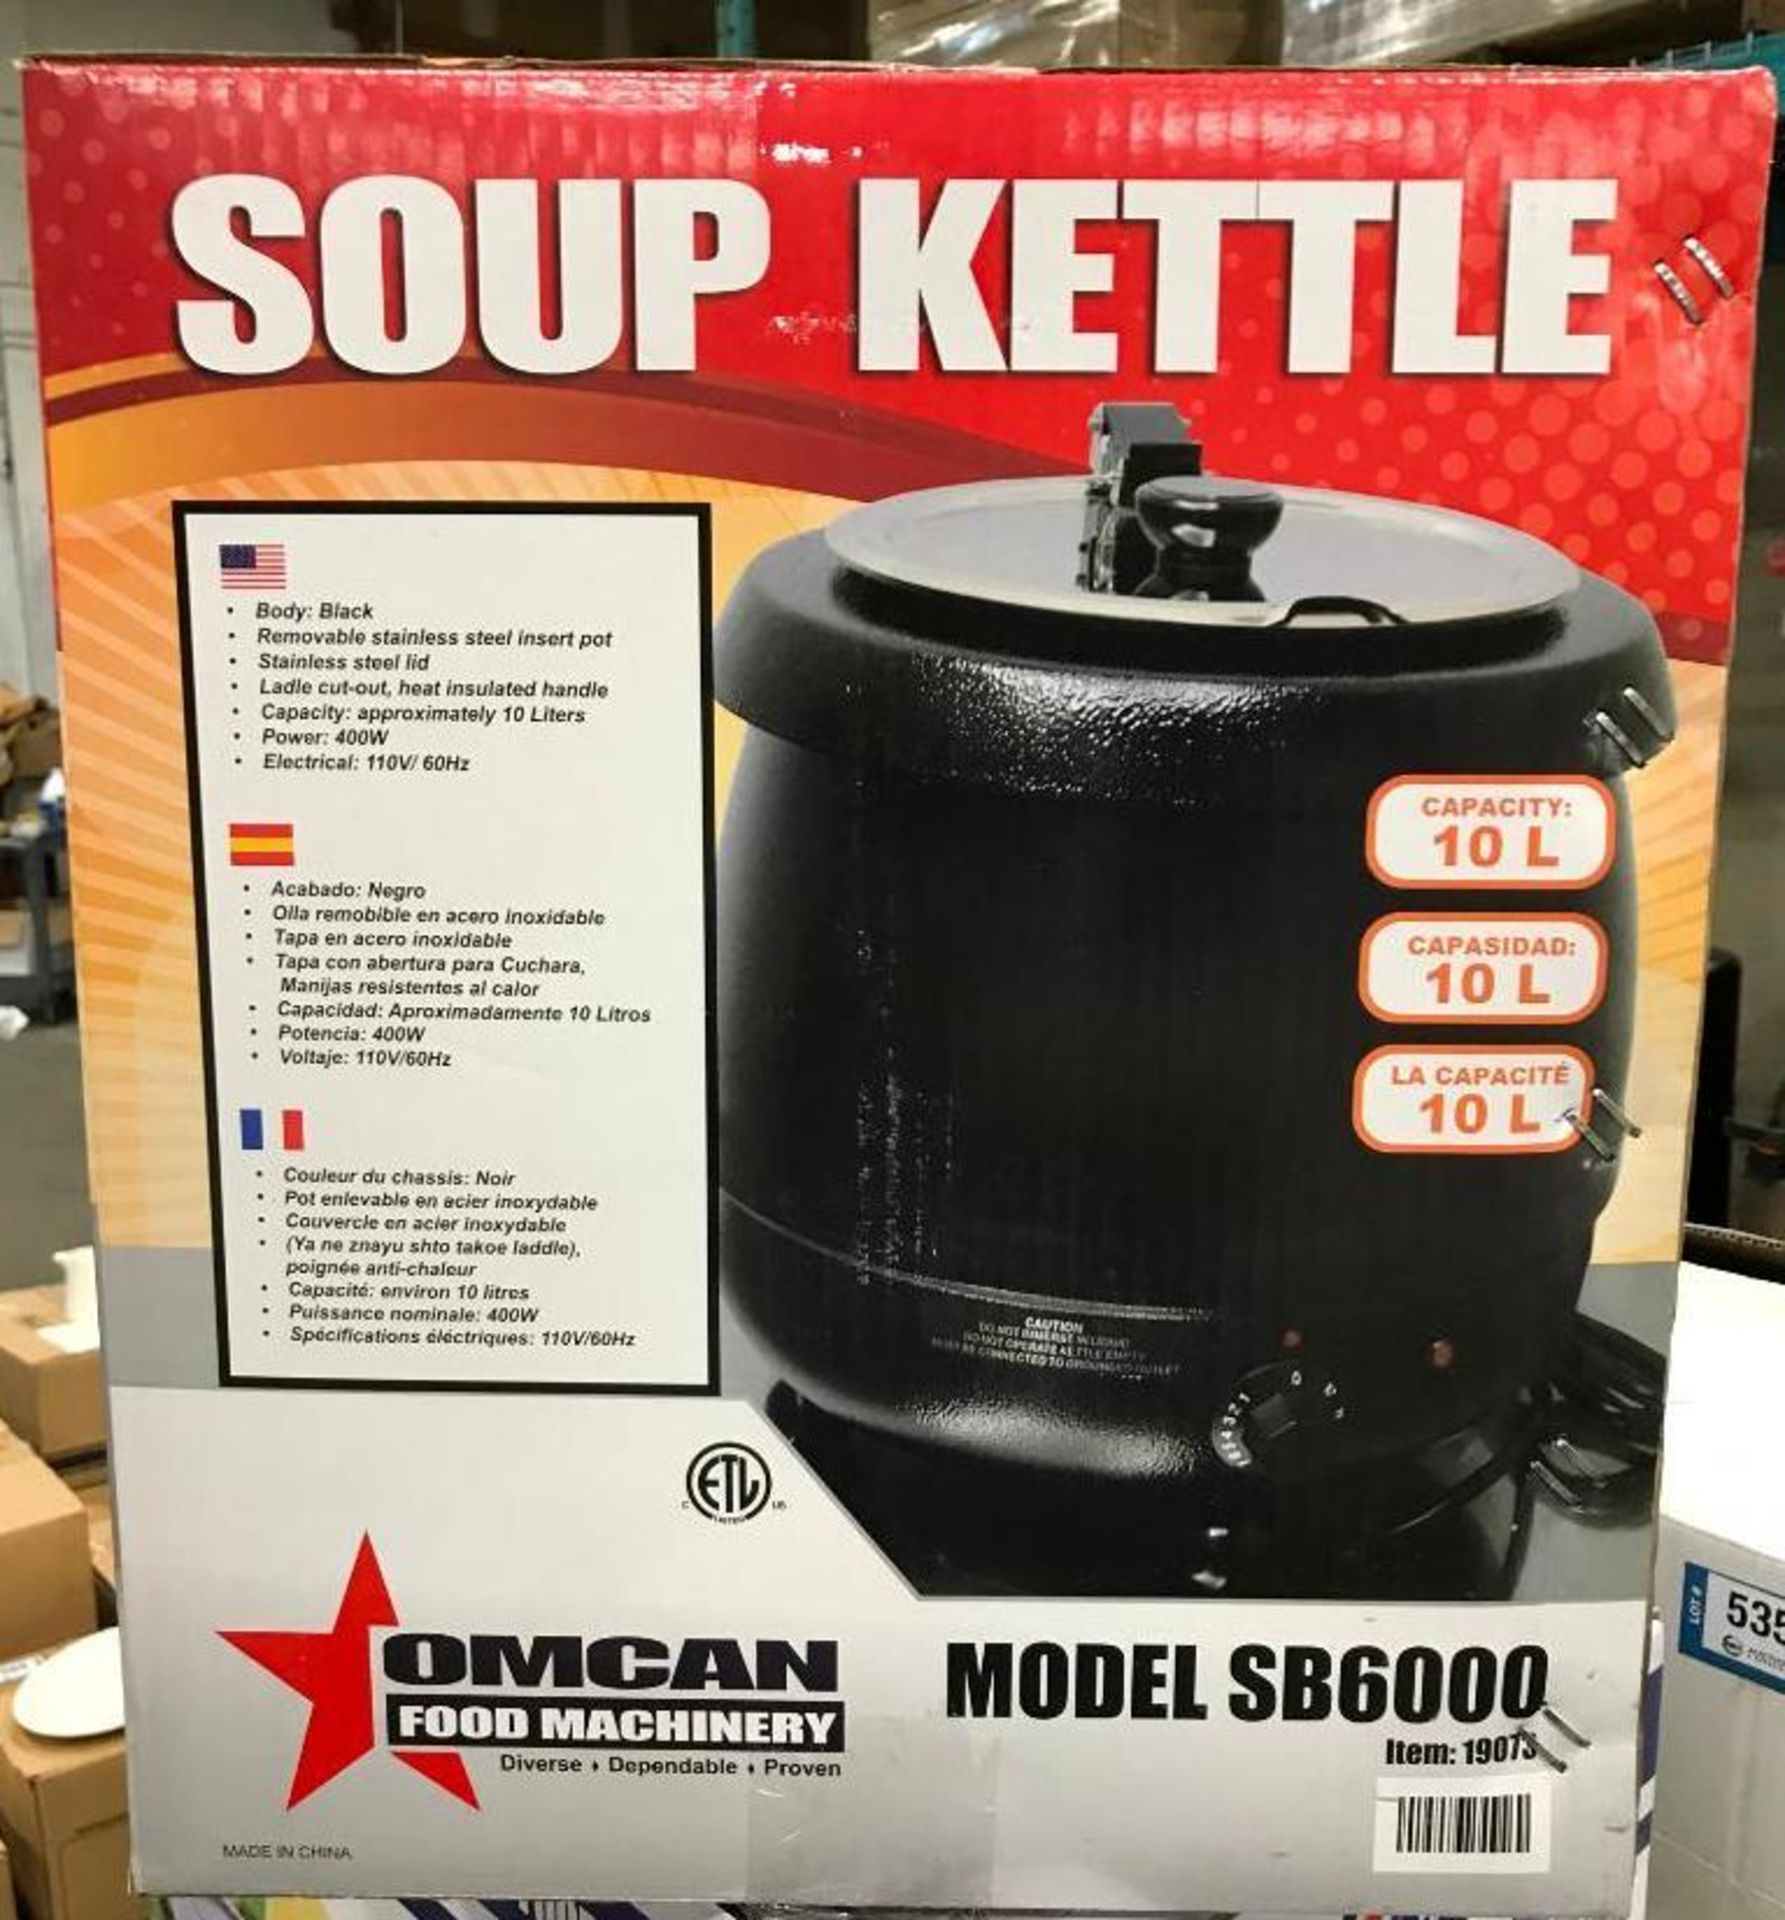 NEW 10.6 QT SOUP KETTLE WITH METAL LID - OMCAN 19073 - Image 4 of 4